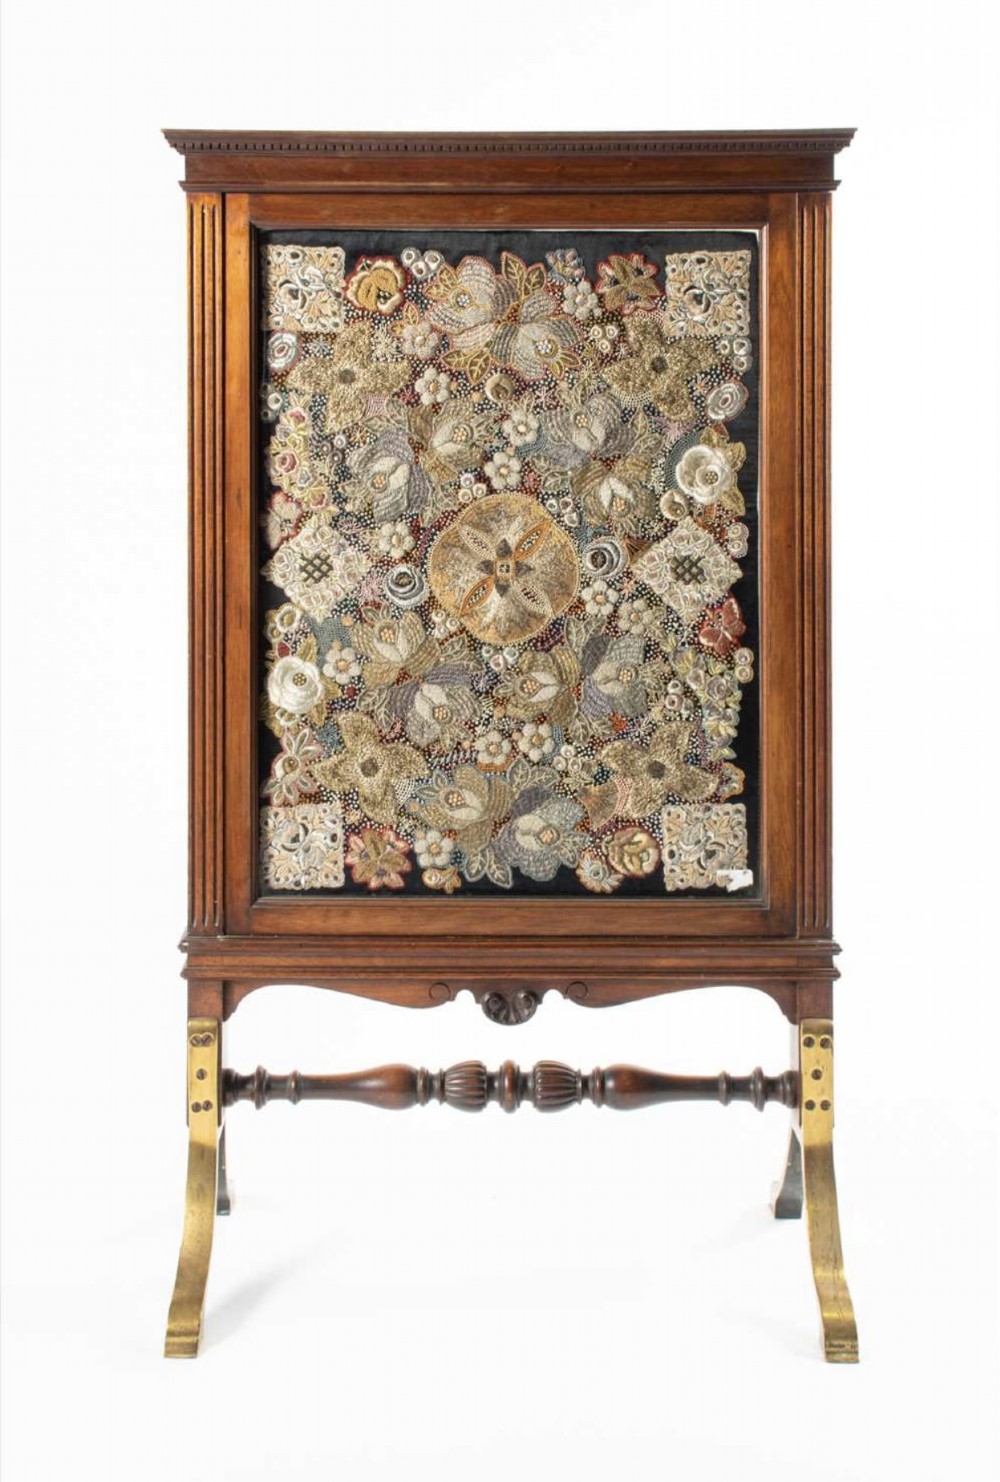 jas scholbred fire screen with amazing silk needlework embroidery